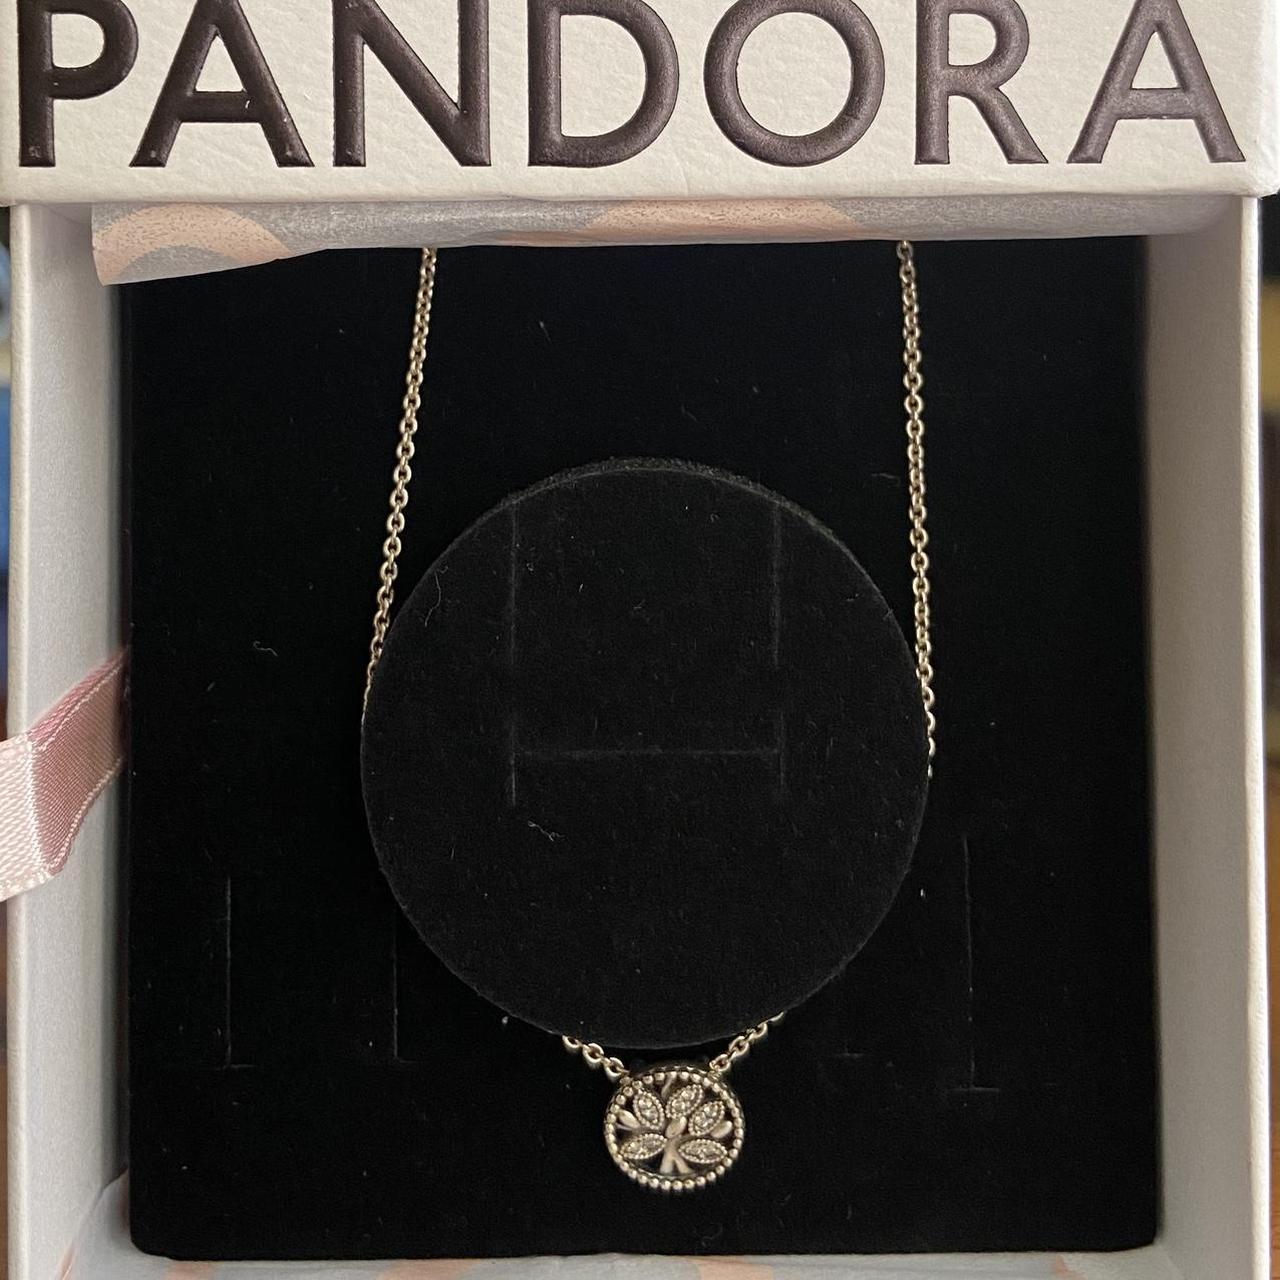 PANDORA Silver Family Tree Necklace 390384CZ 80cm Length on OnBuy-tuongthan.vn